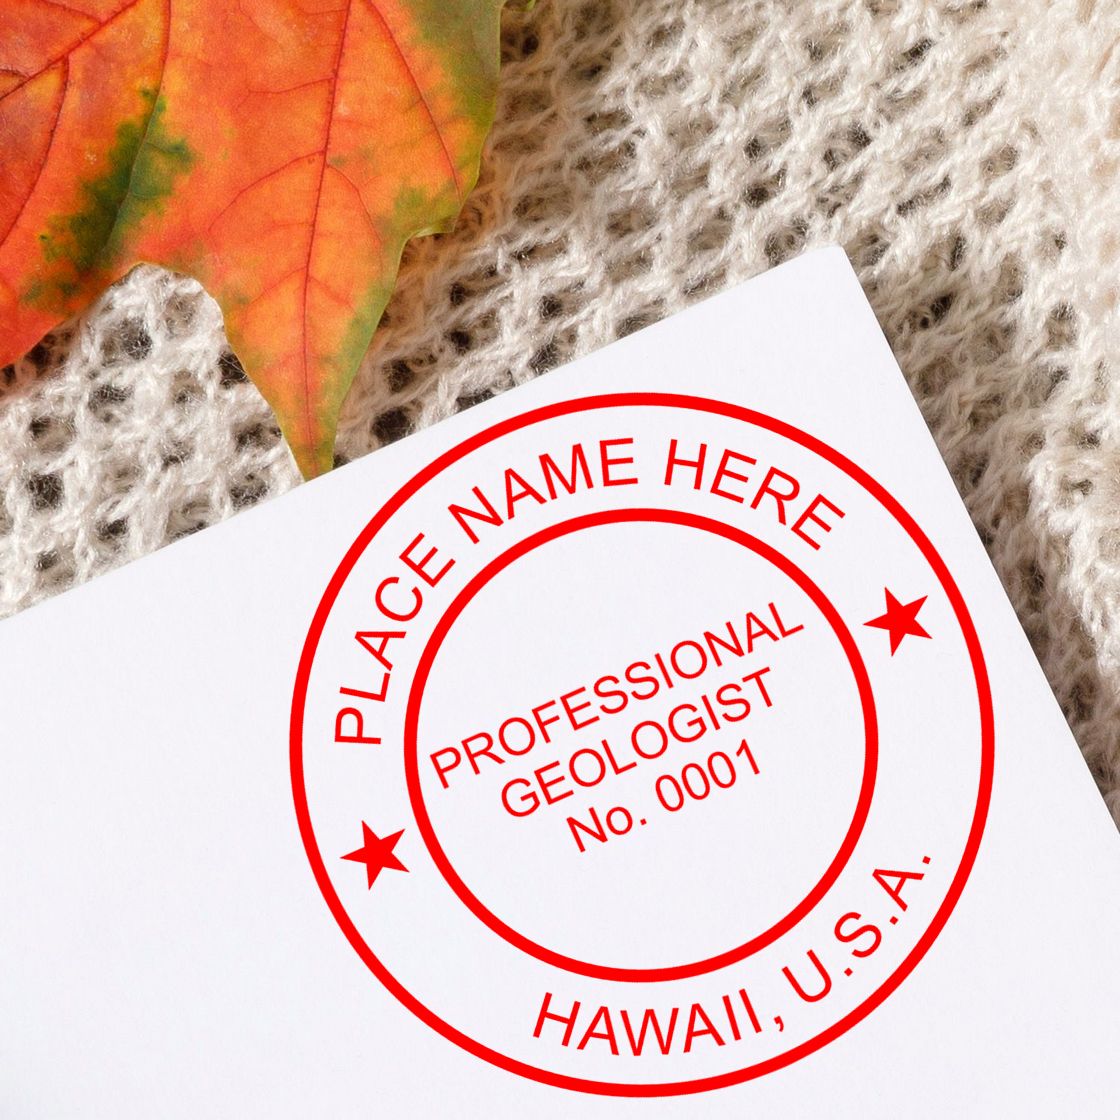 The Digital Hawaii Geologist Stamp, Electronic Seal for Hawaii Geologist stamp impression comes to life with a crisp, detailed image stamped on paper - showcasing true professional quality.